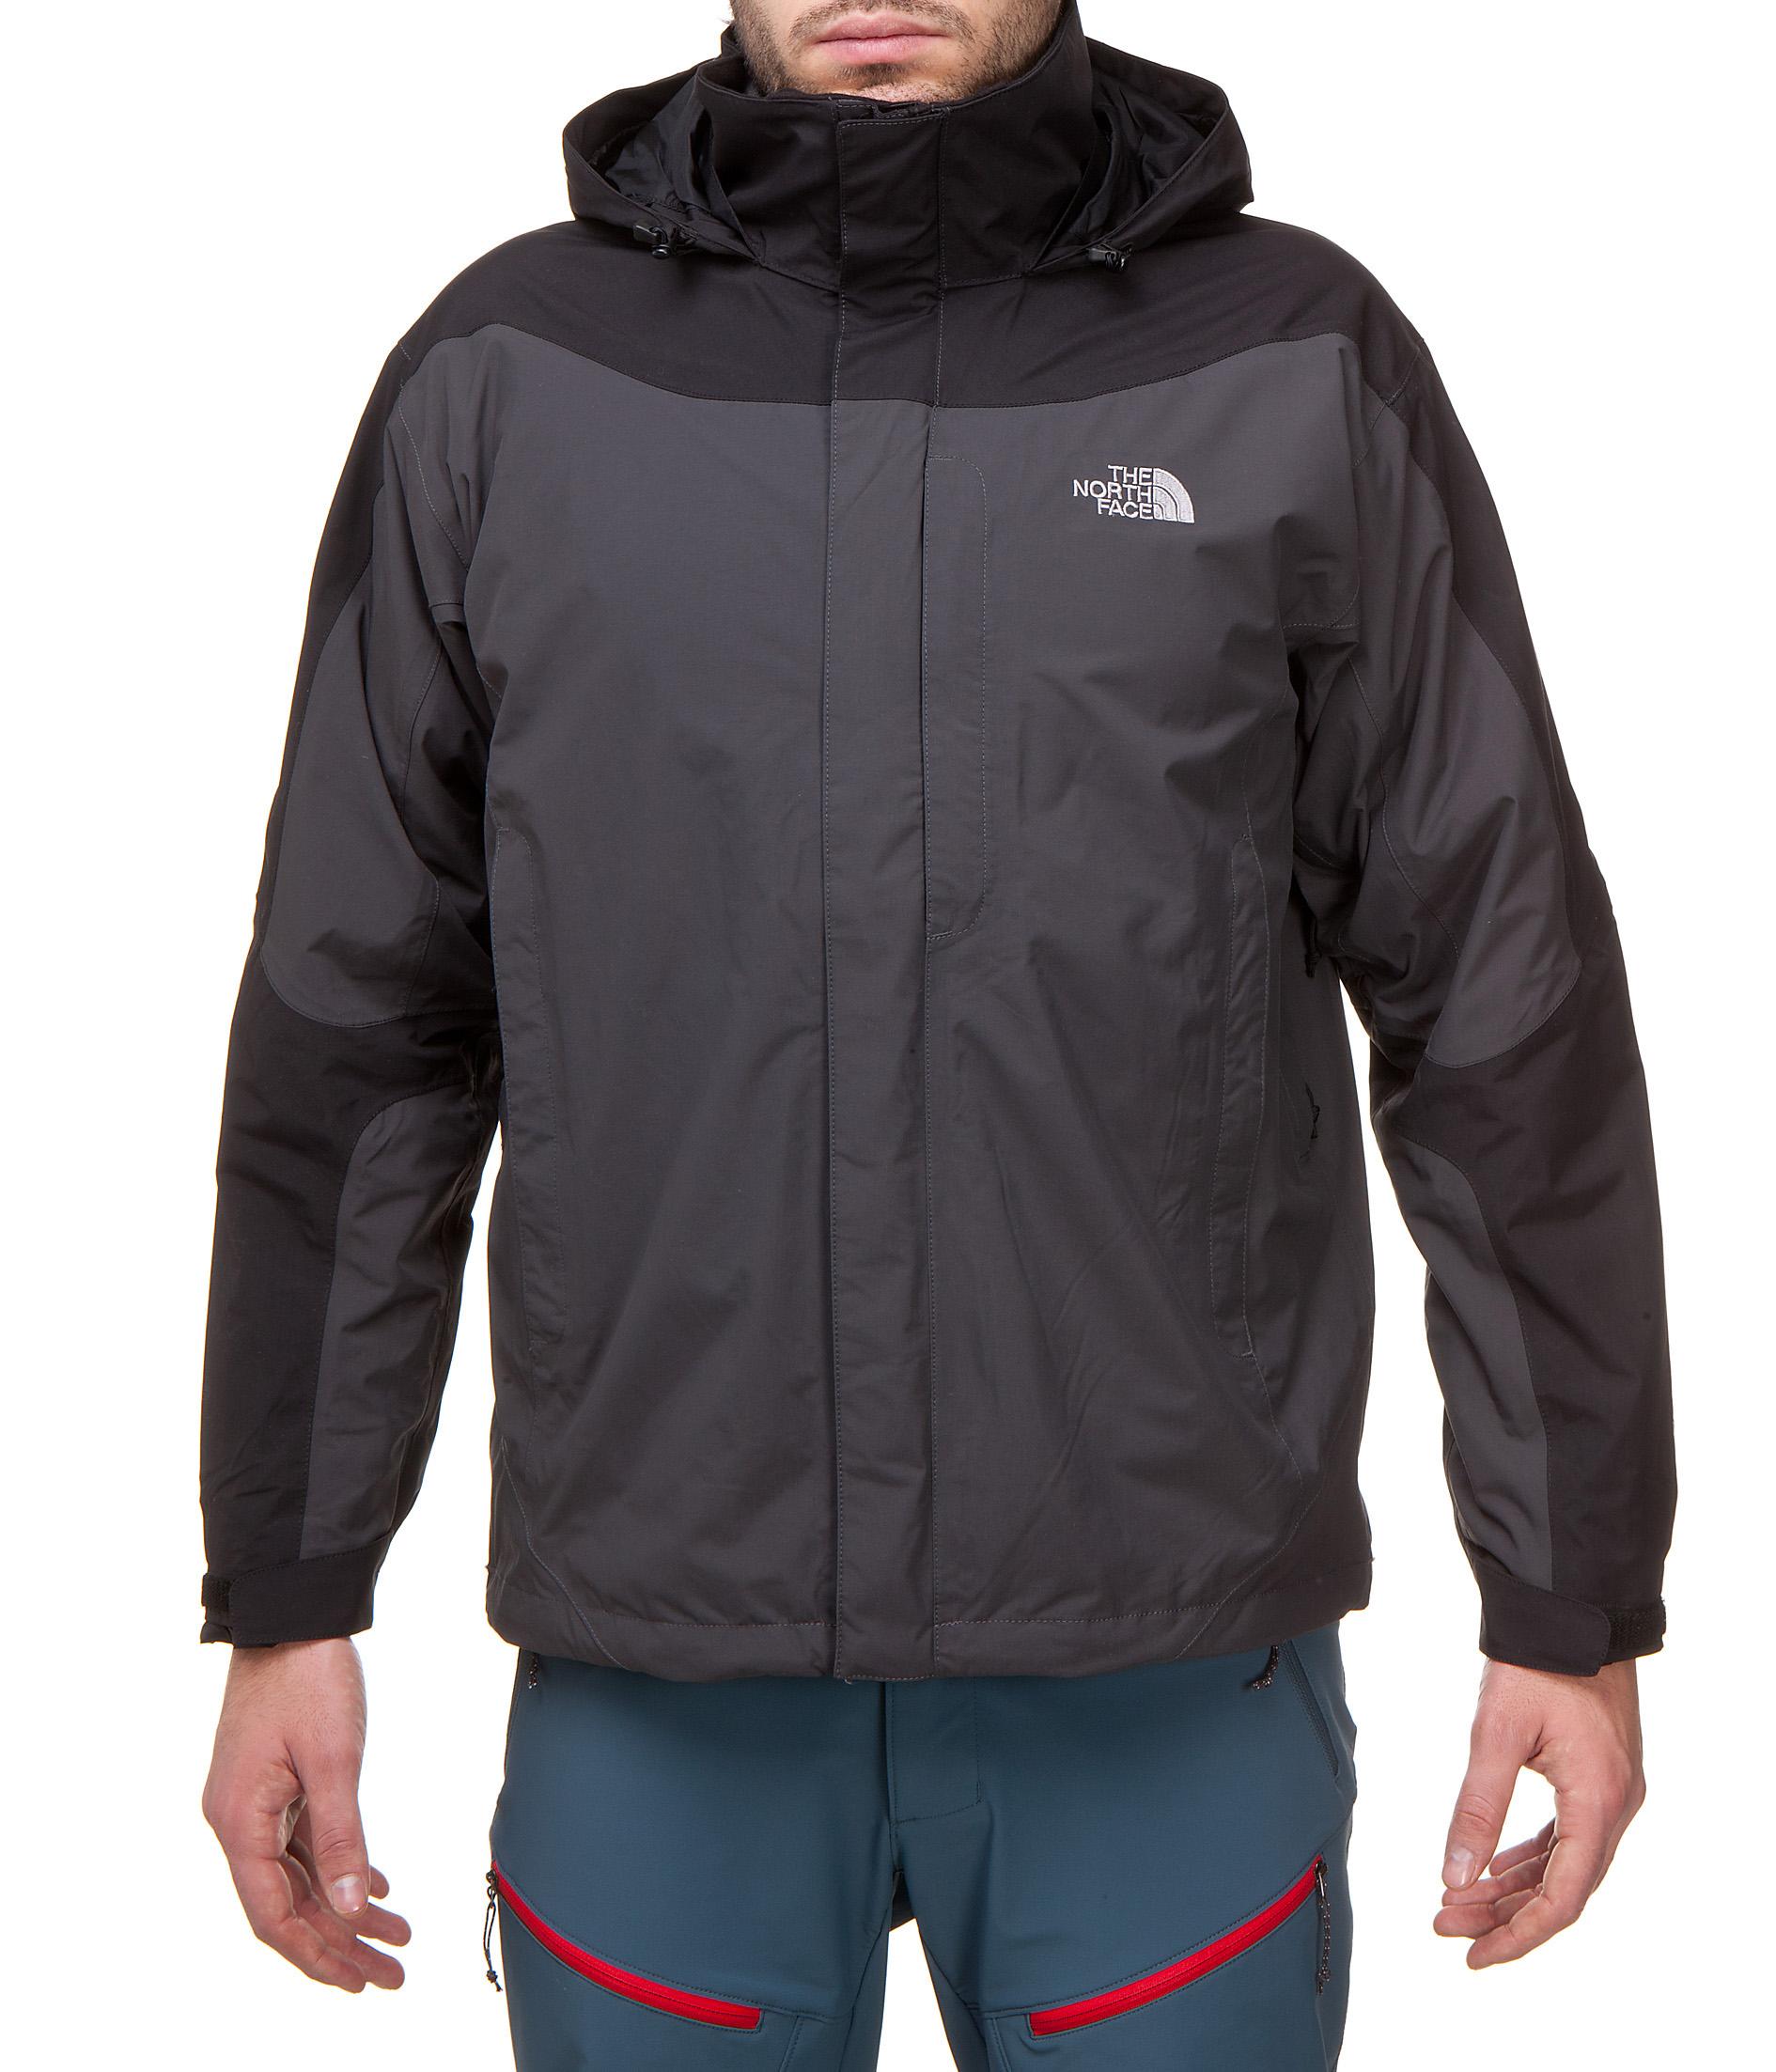 Foto The North Face Men's Evolution Triclimate Jacket foto 213844